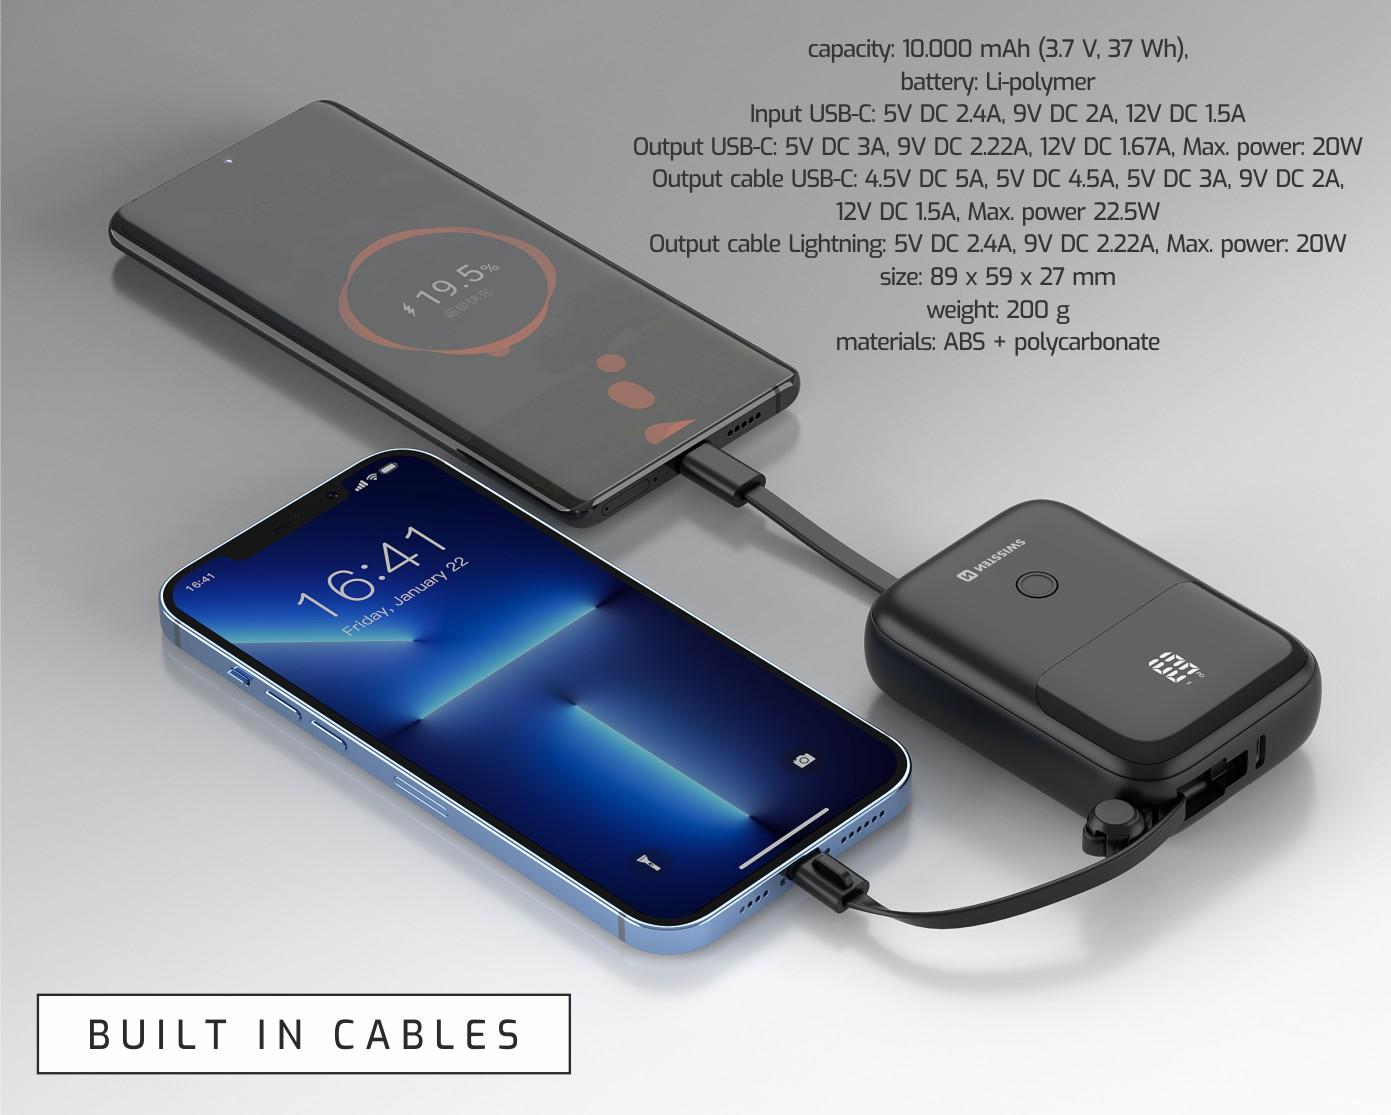 SWISSTEN POWER BANK 10000 mAh 22,5W WITH BUILT-IN CABLES USB-C AND LIGHTNING